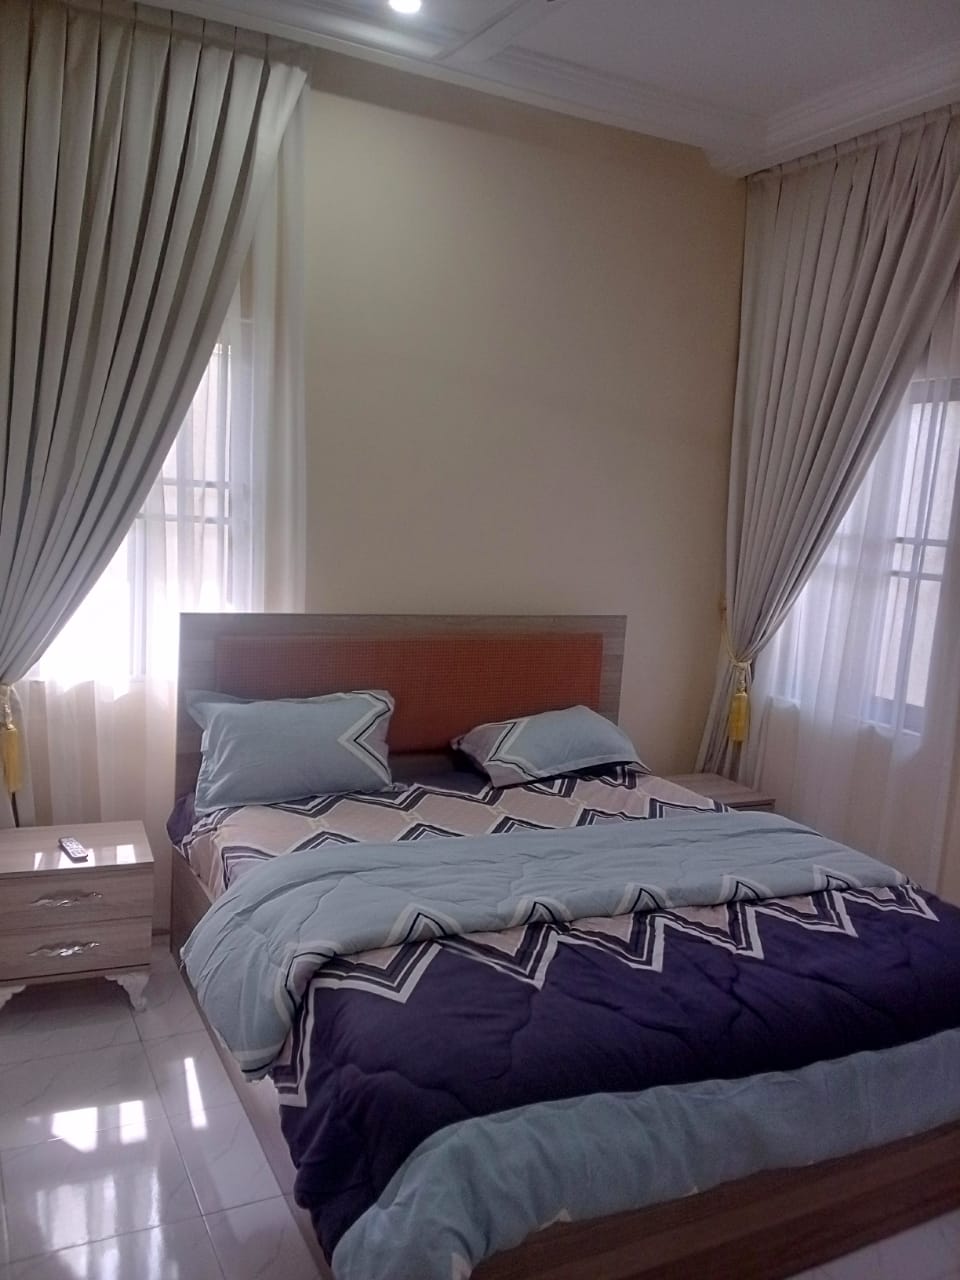 2 Bedroom Furnished Apartment for Rent at Achimota Mile 7